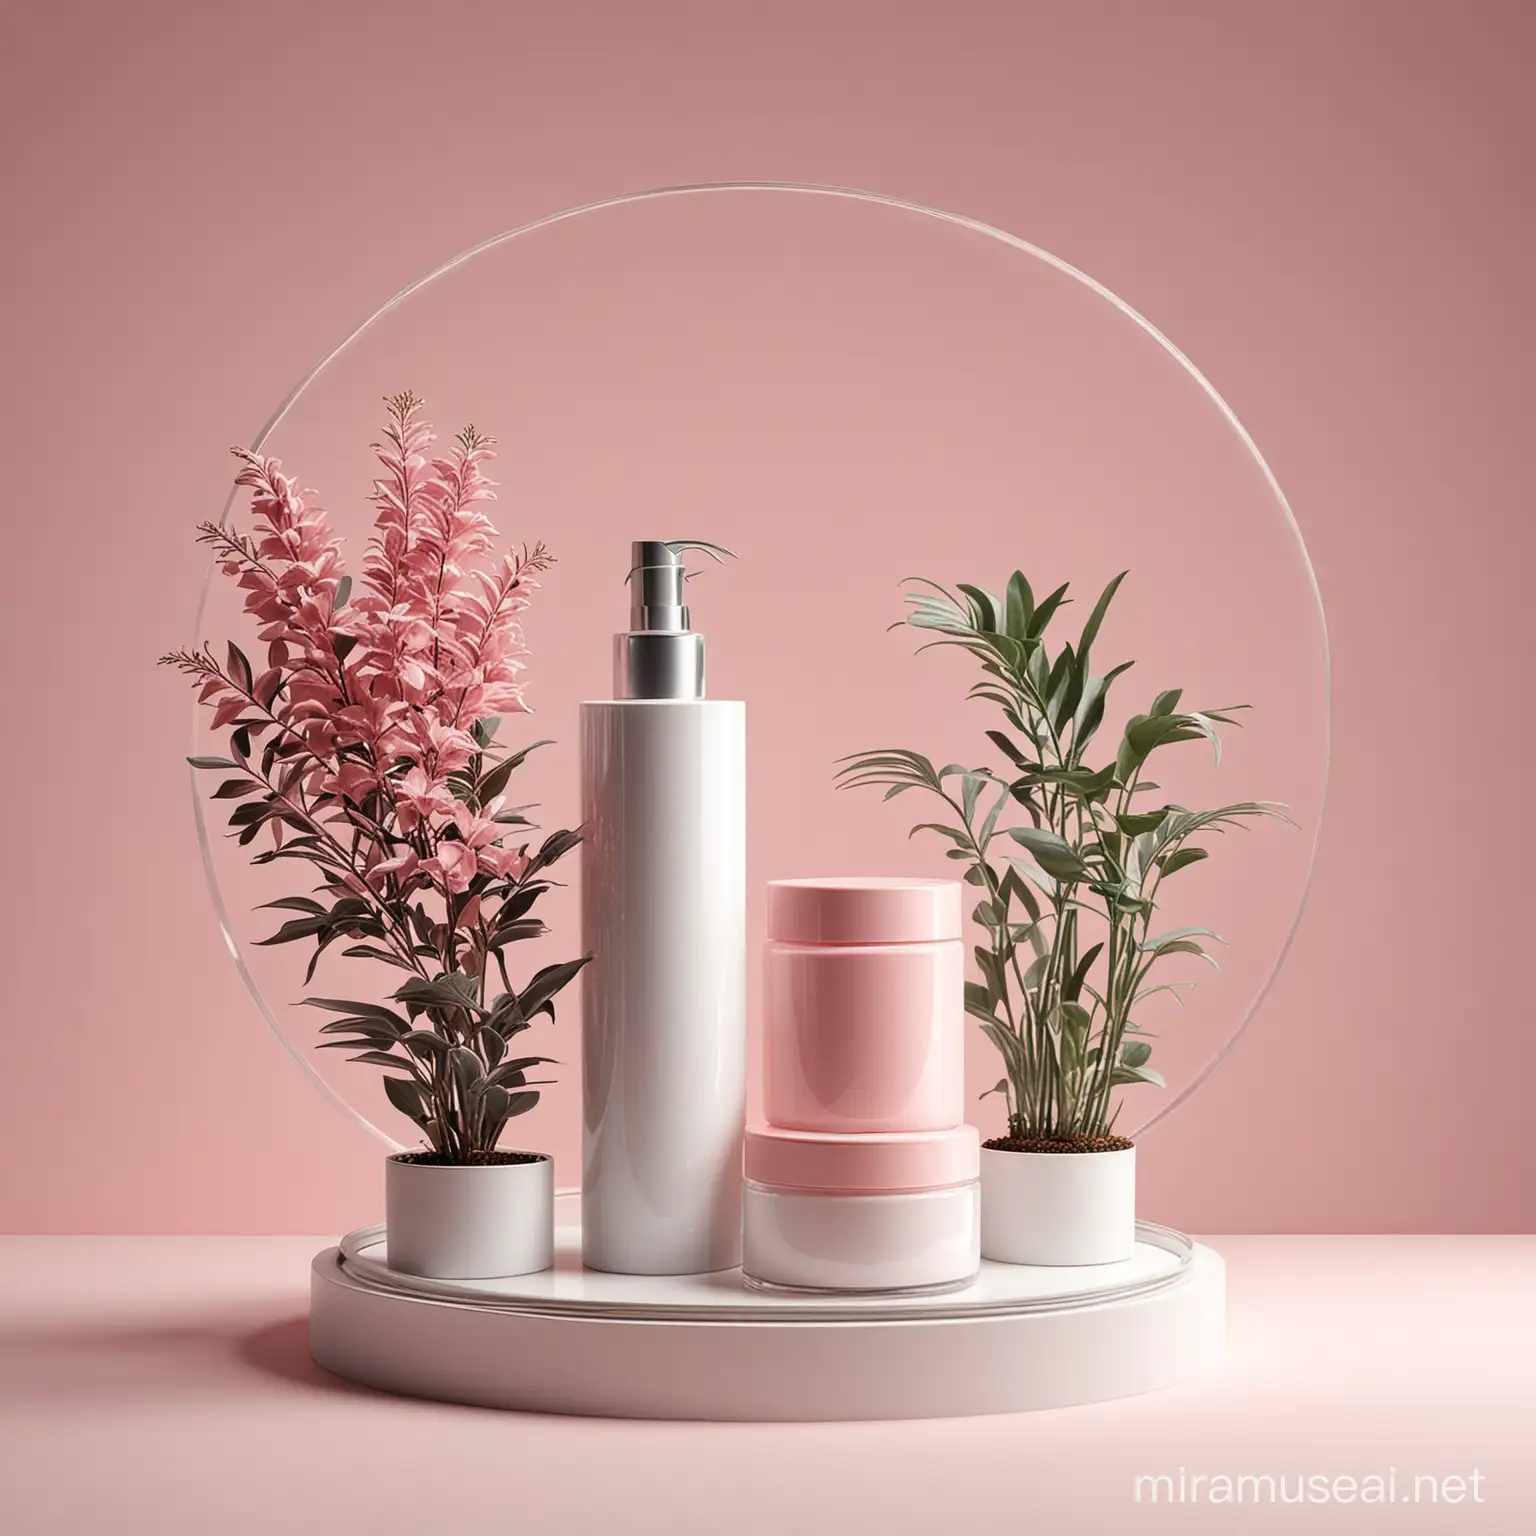 Realistic Botanical Cosmetic Display with White and Pink Tones